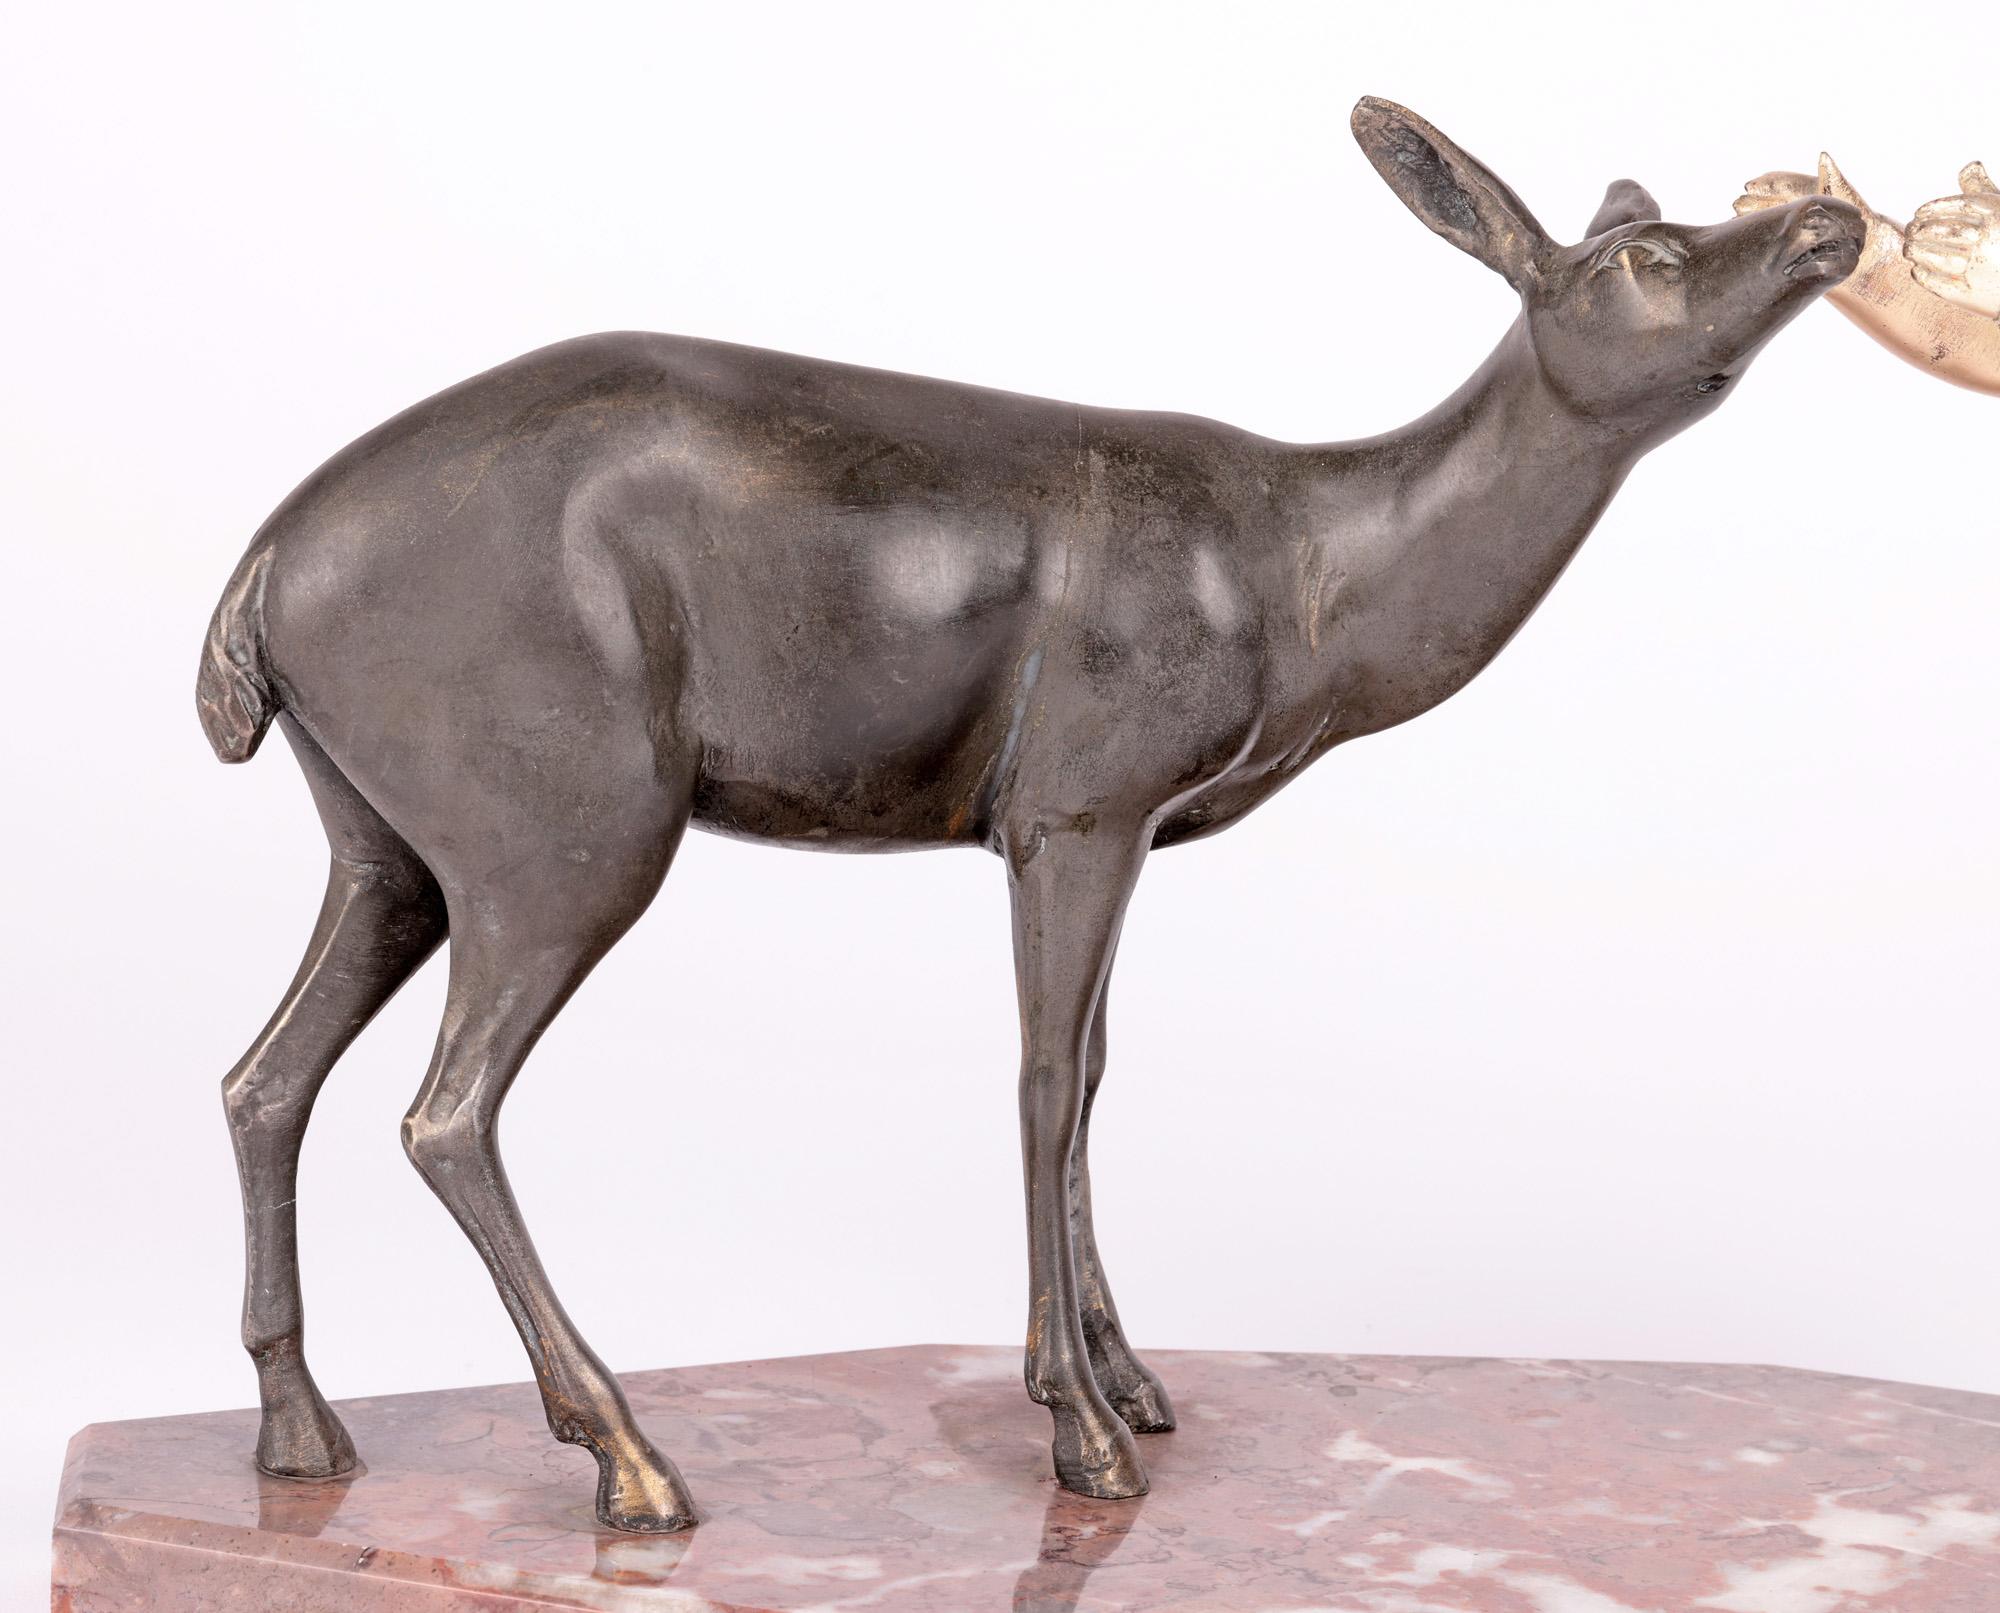 A stylish French Art Deco silvered sculpture young child with deer 
a very stylish French Art Deco sculpture of a young child with a young deer mounted on a red marble base by Uriano and dating from around 1925. The sculpture portrays a metal cast